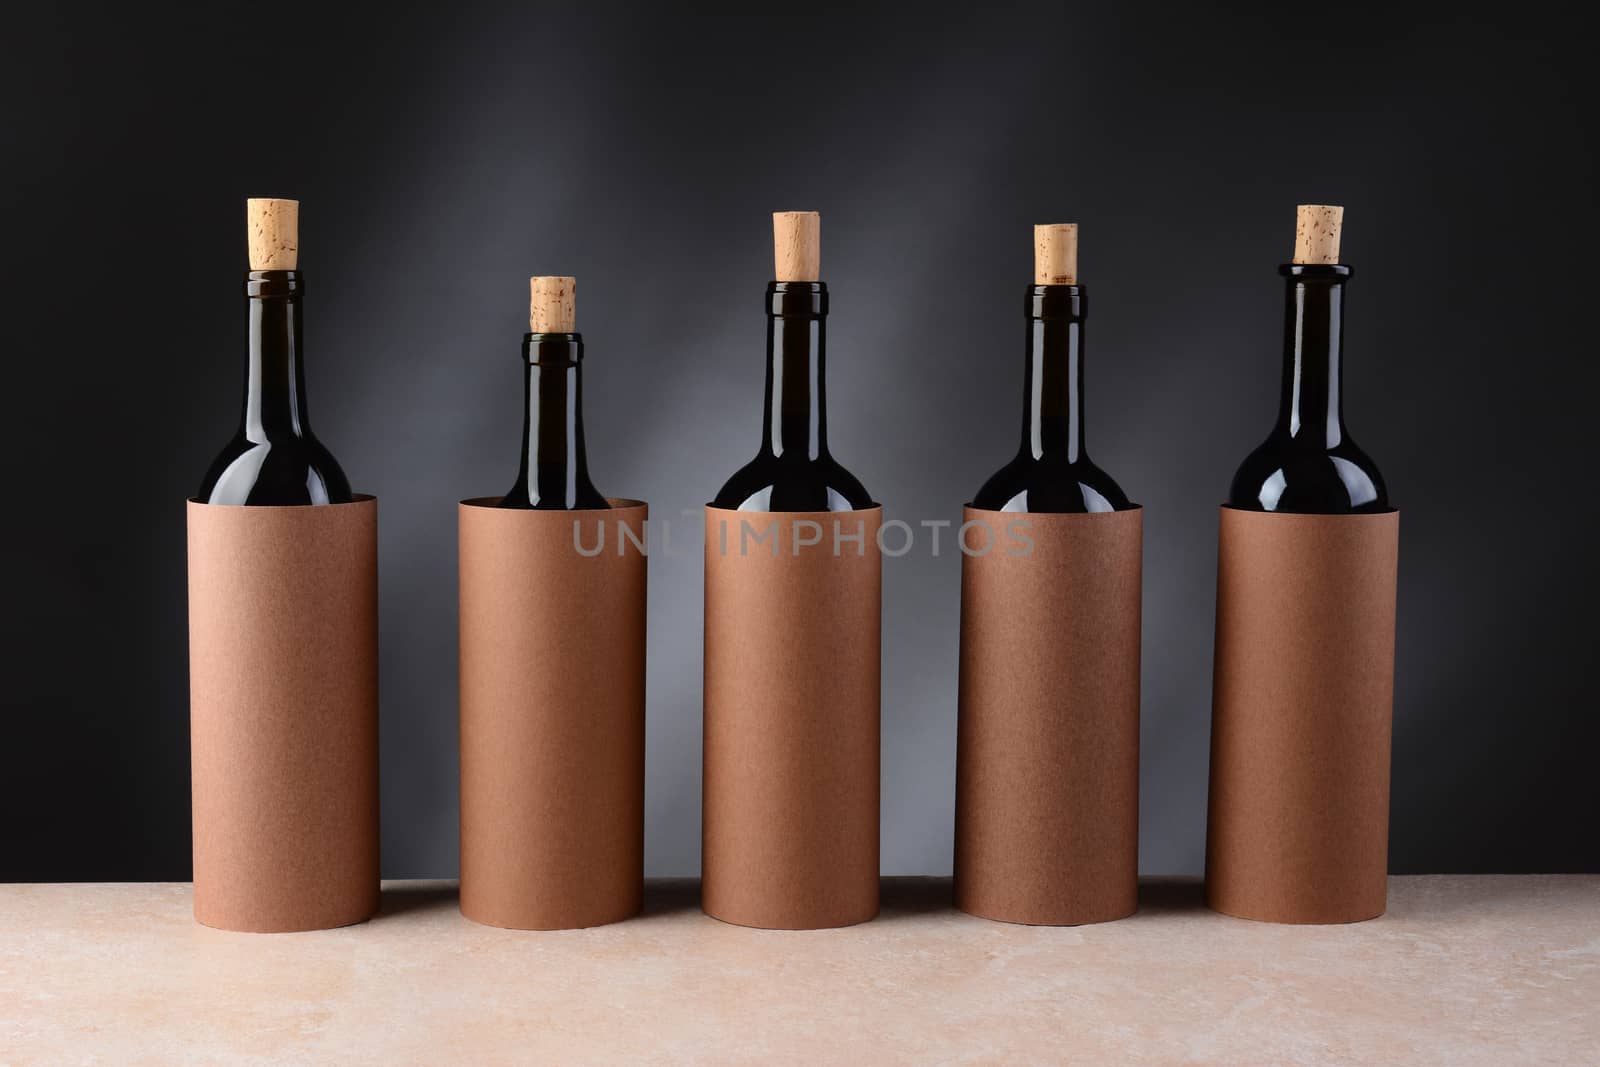 Five different wine bottles set up for a blind wine tasting. The bottles have the corks partially removed and are covered by blank cylinders to hide the label. Horizontal format.